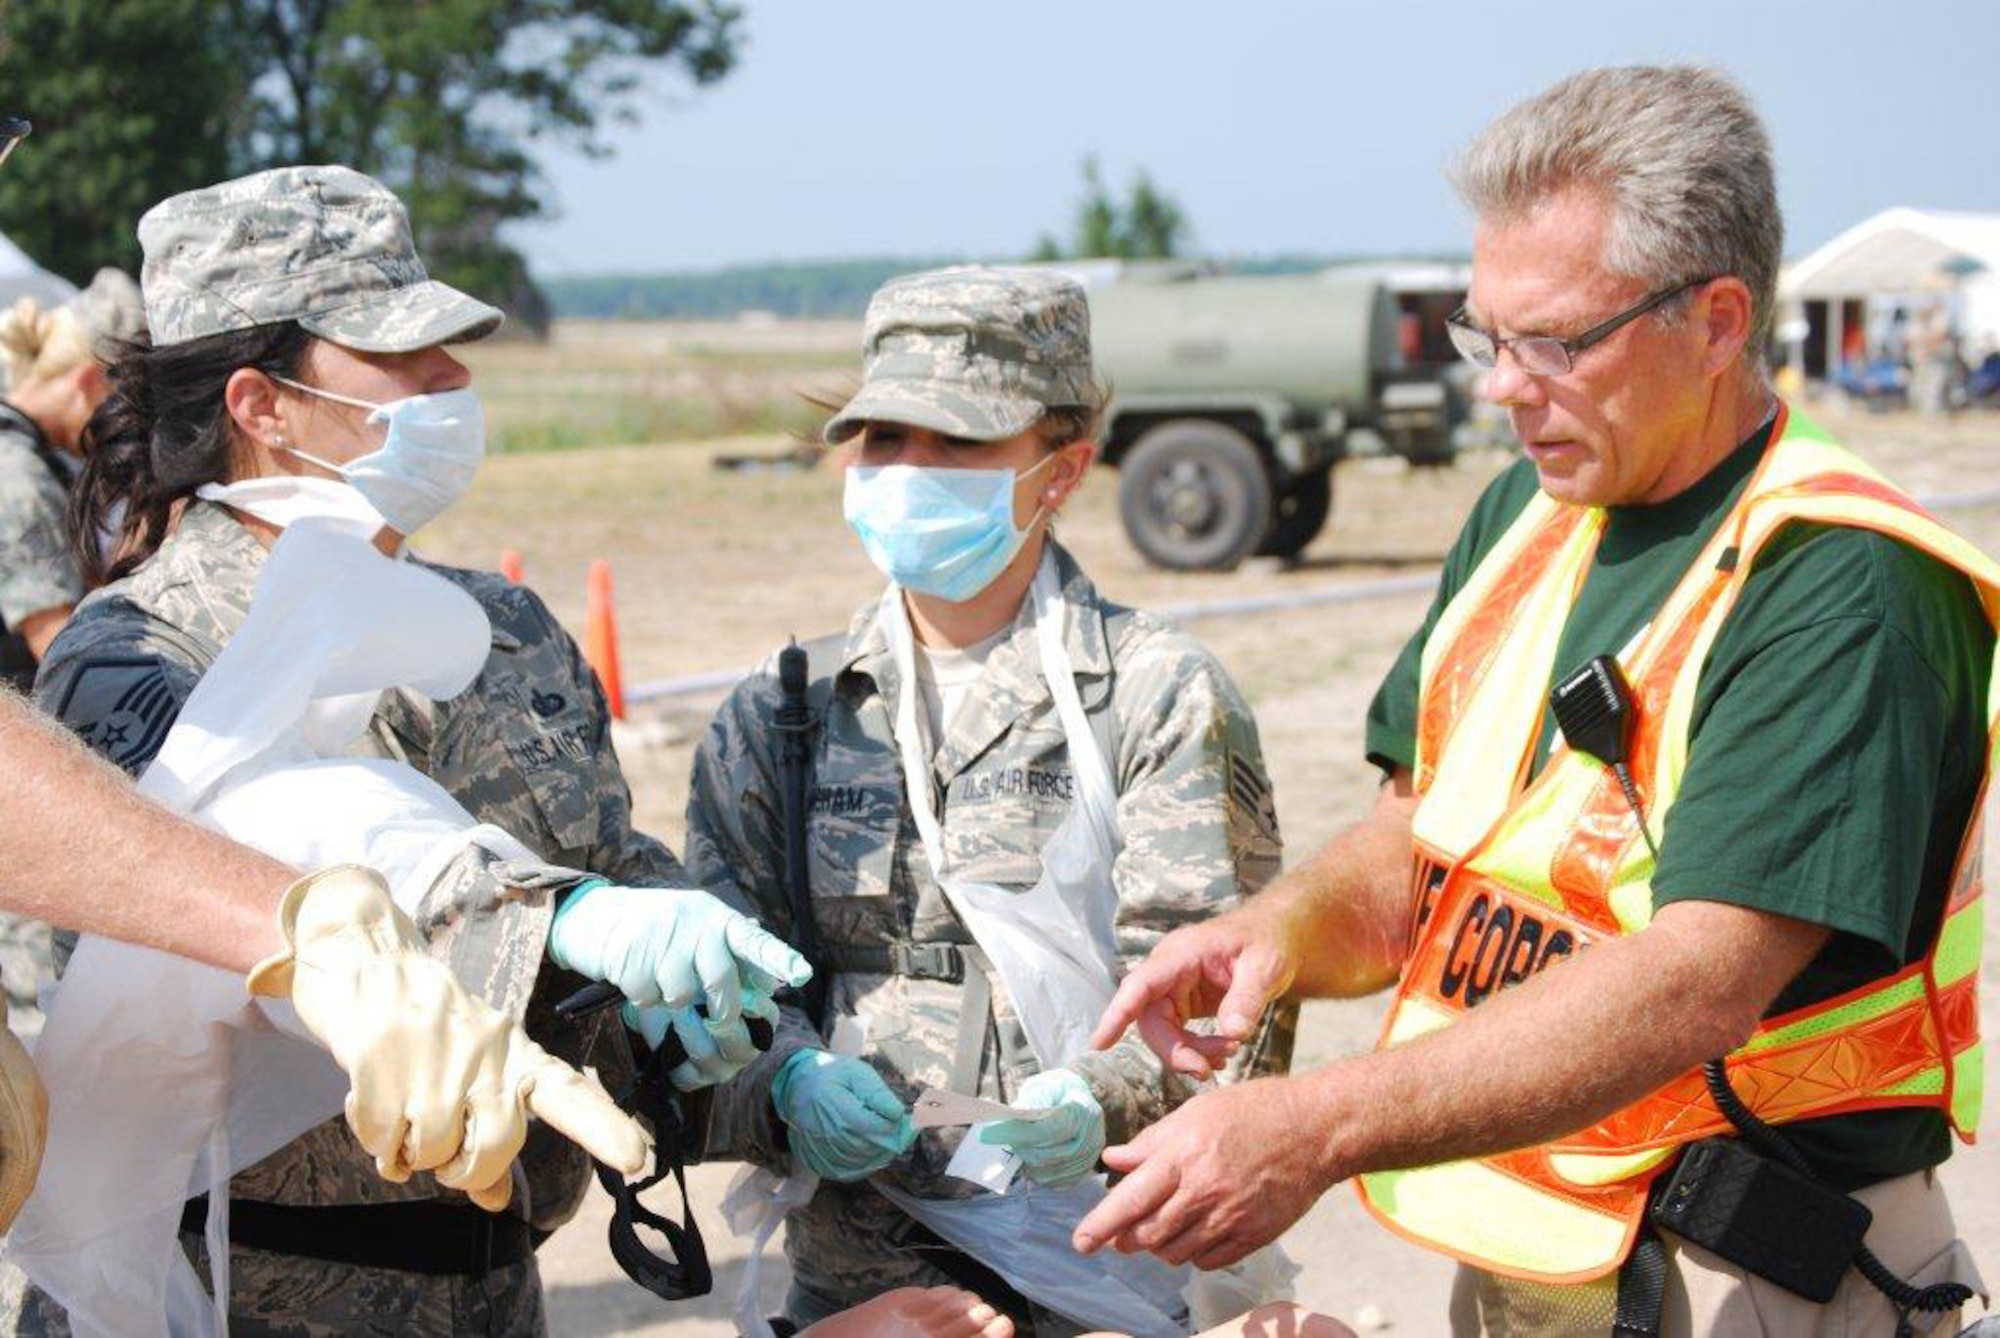 Kentucky Air National Guard Senior Airman Shelby Basham (center), a Fatality Search and Recovery Team member, talks to other FSRT members and the on-scene coroner during Patriot 12, a disaster-response exercise held at Volk Field, Wis., from July 13-20, 2012. The Kentucky Air Guard joined with the Arizona and Minnesota Air Guard FSRTs to train a newly established Indiana team during the exercise. (Courtesy Photo)